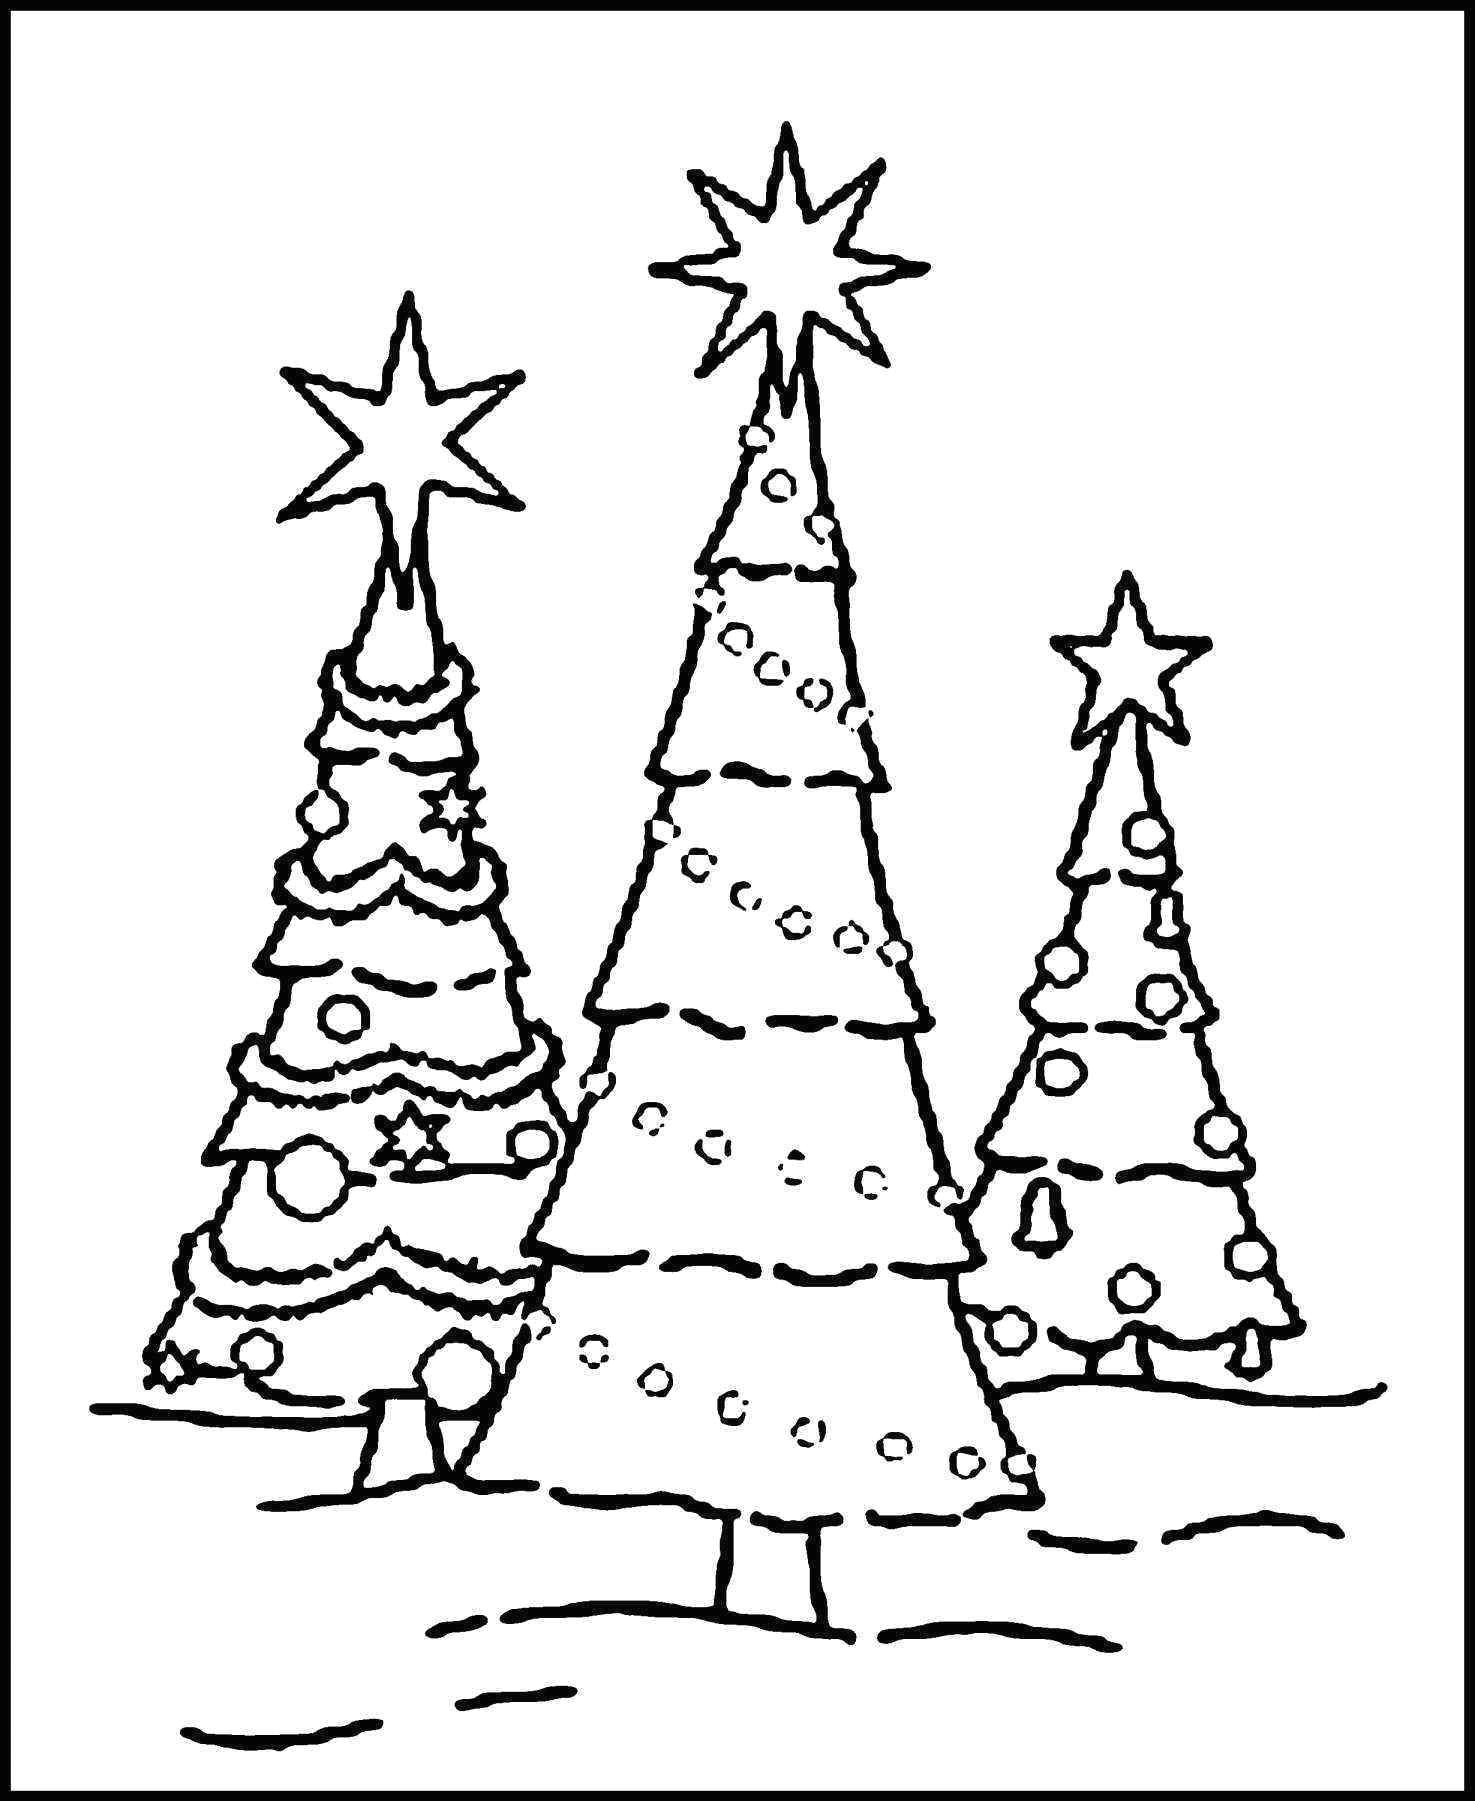 Drawing Of A Christmas Tree Luxury Christmas Tree Black and White Drawing Prekhome